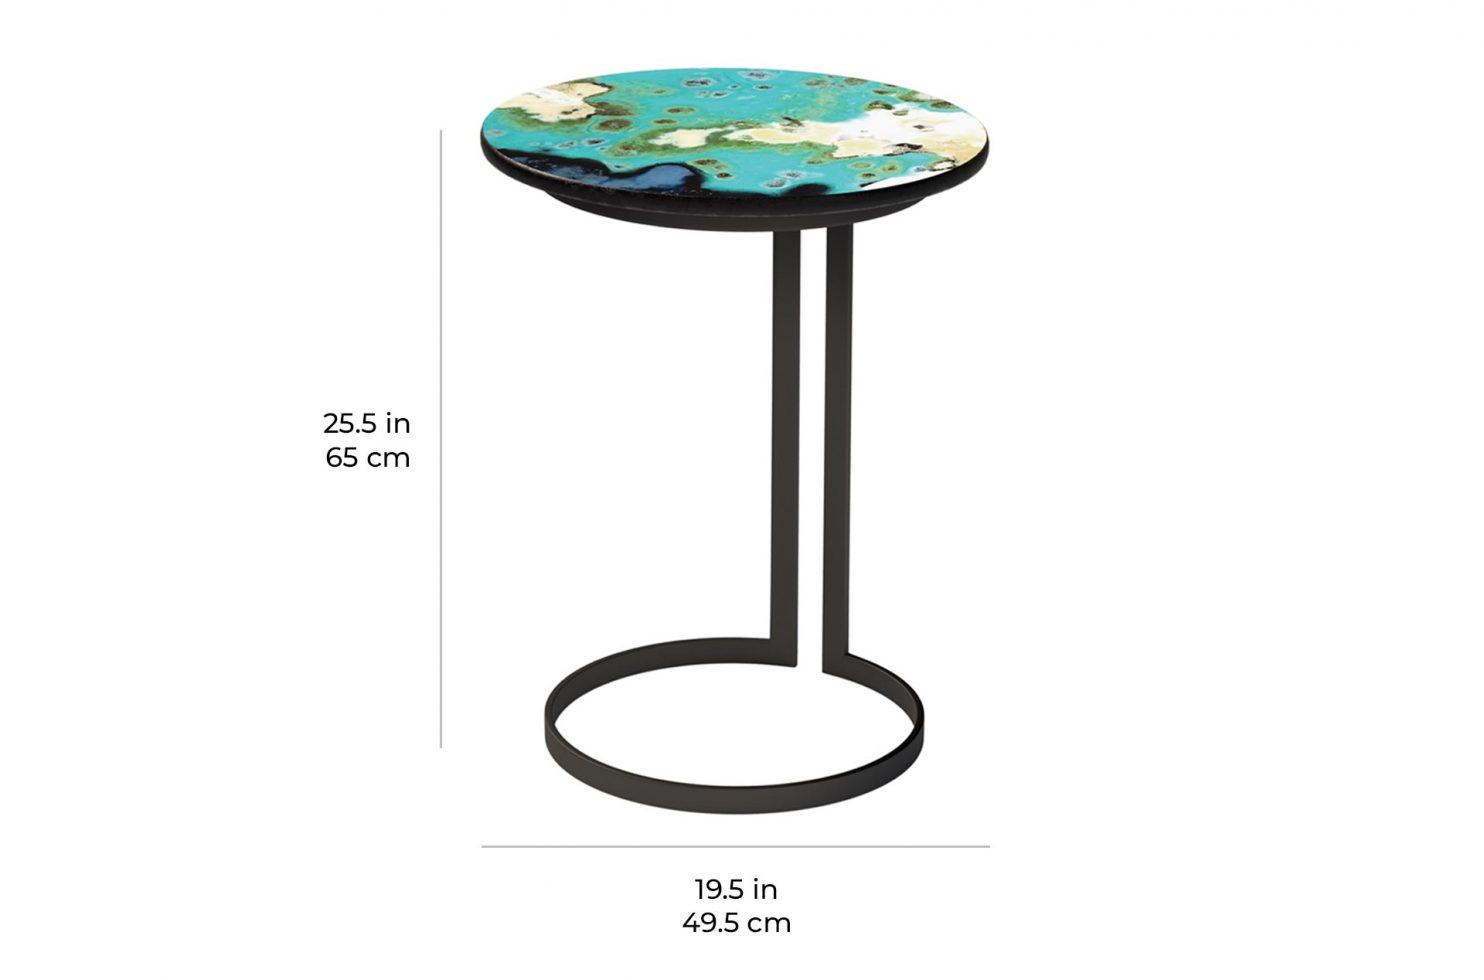 etna c table 390FT002P2 scale dims